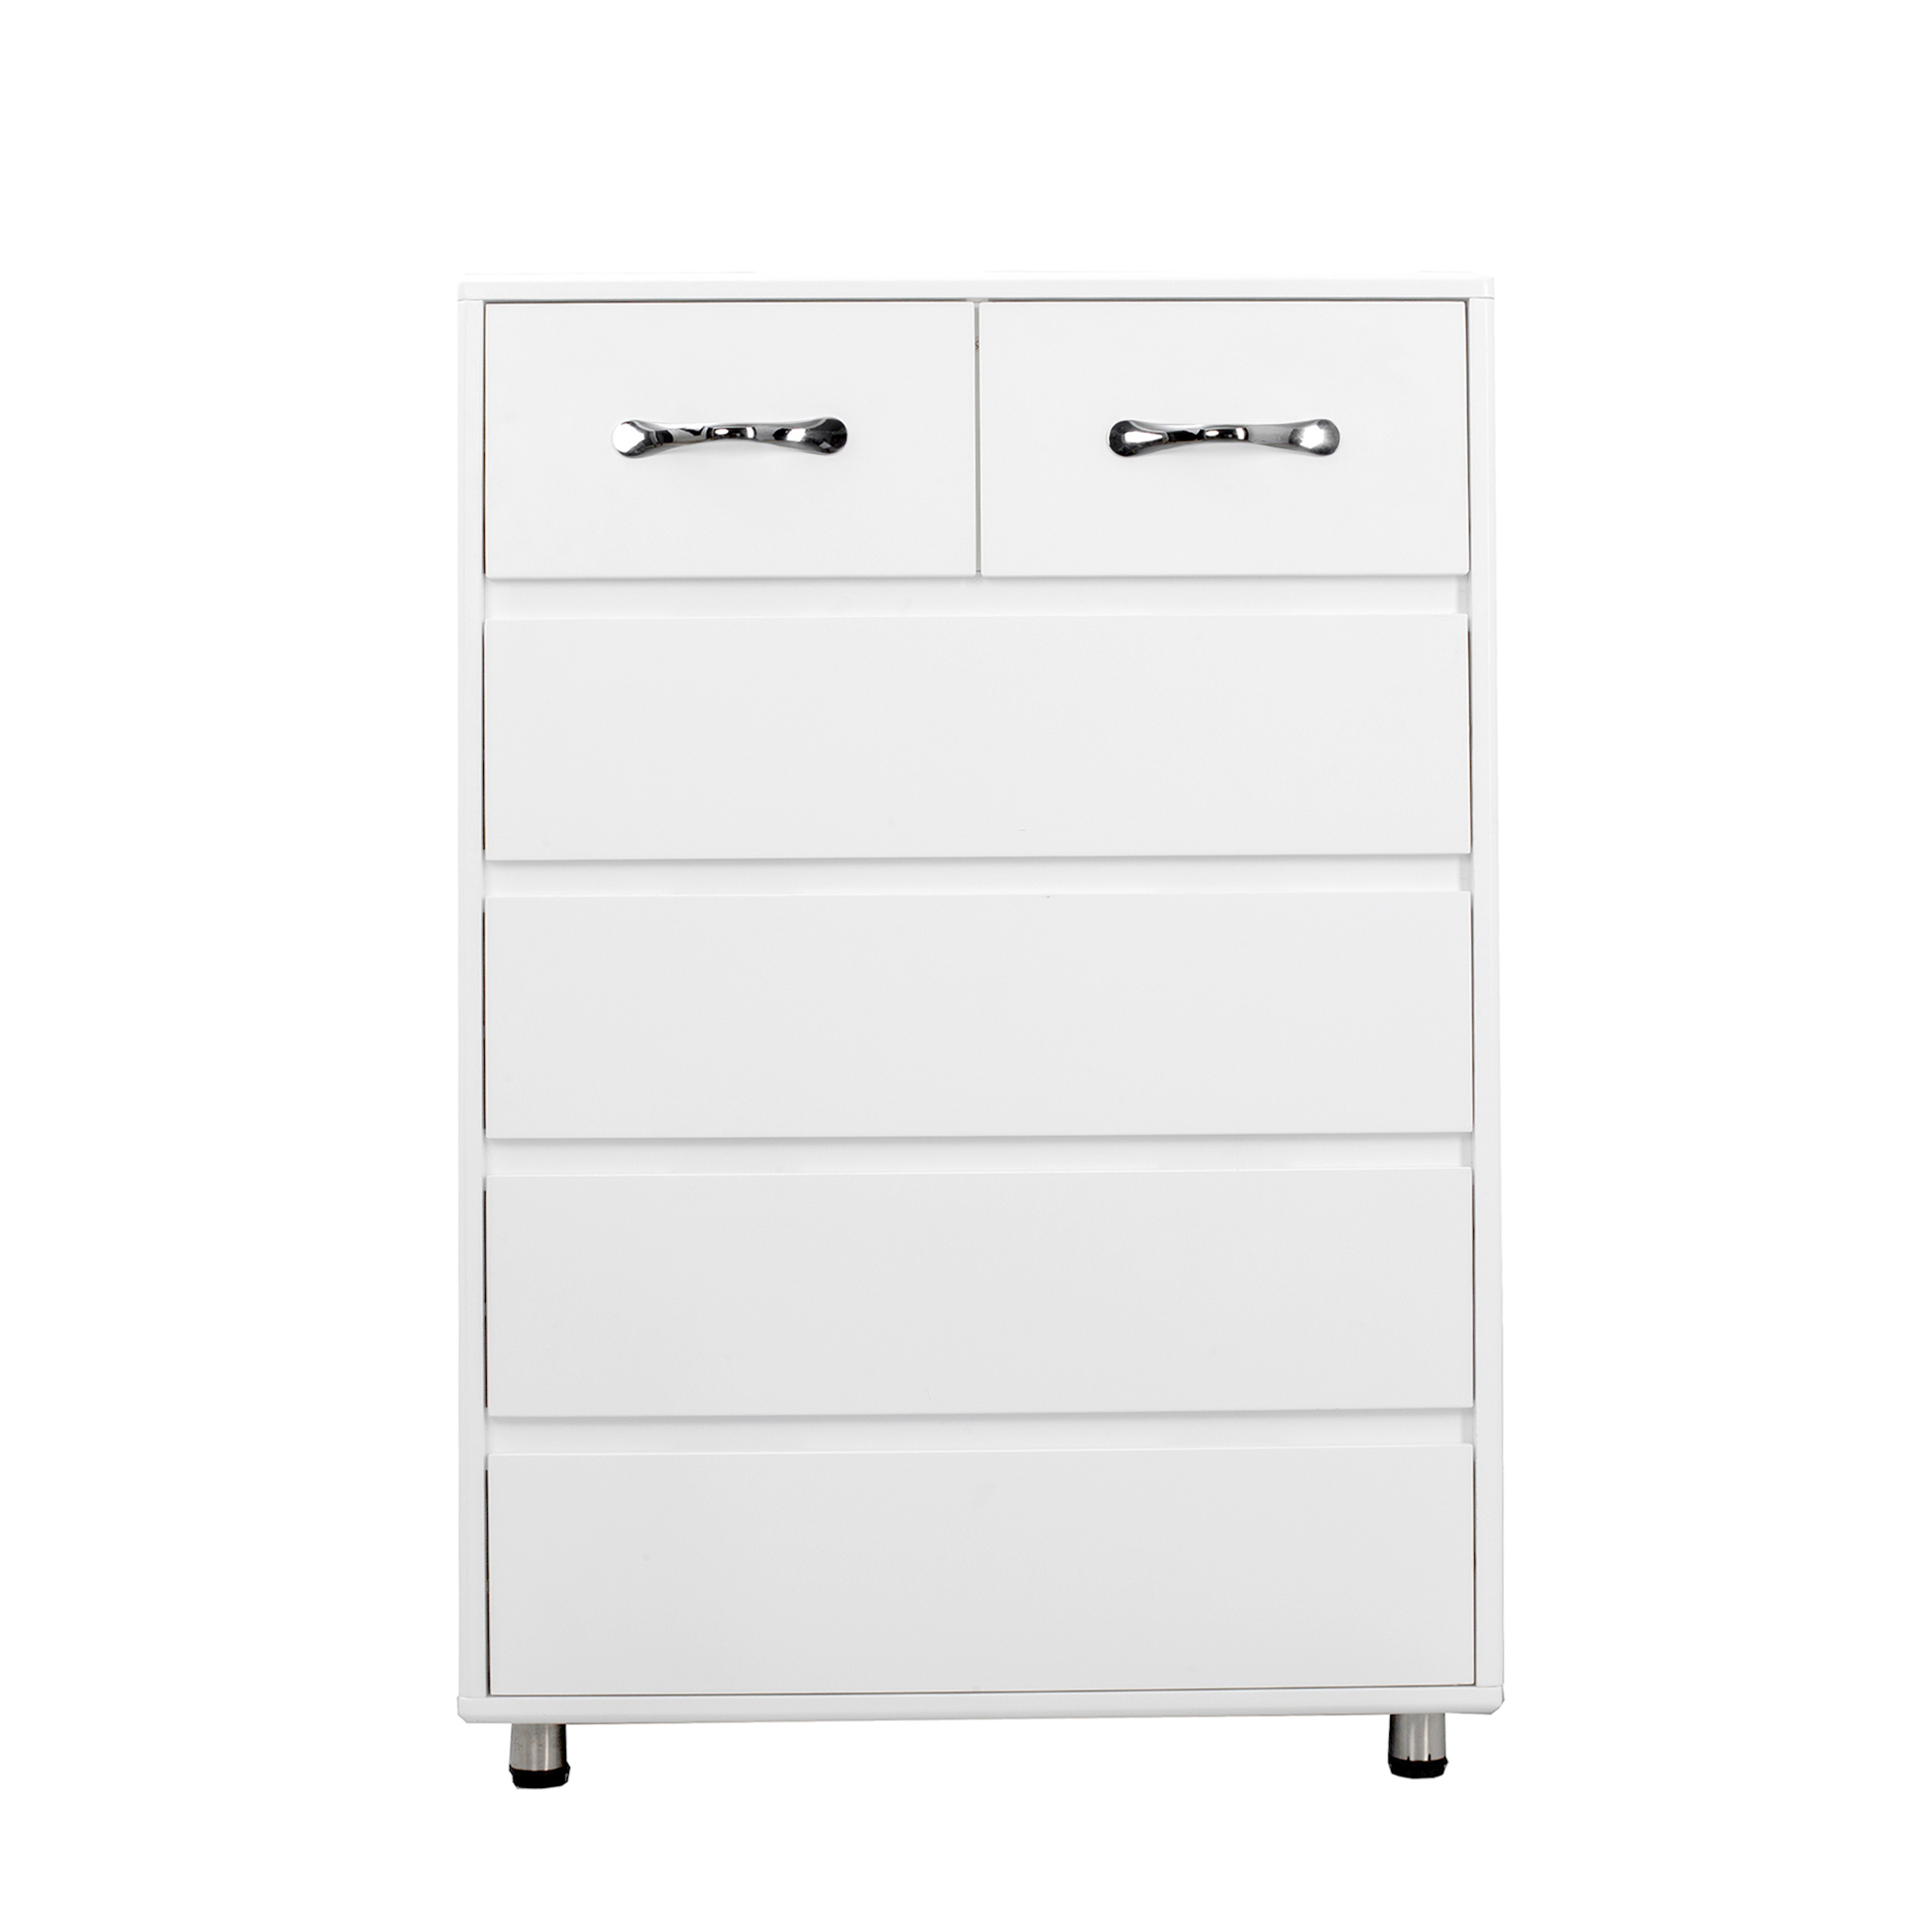 6 Drawer Dresser, URHOMEPRO Chest of Drawers Storage Organizer Nightstand, Wood Frame Drawer Chest with Steel Tube Legs, Bathroom Floor Cabinet, Living Room Office Bedroom Furniture, White, W12868 - image 4 of 10